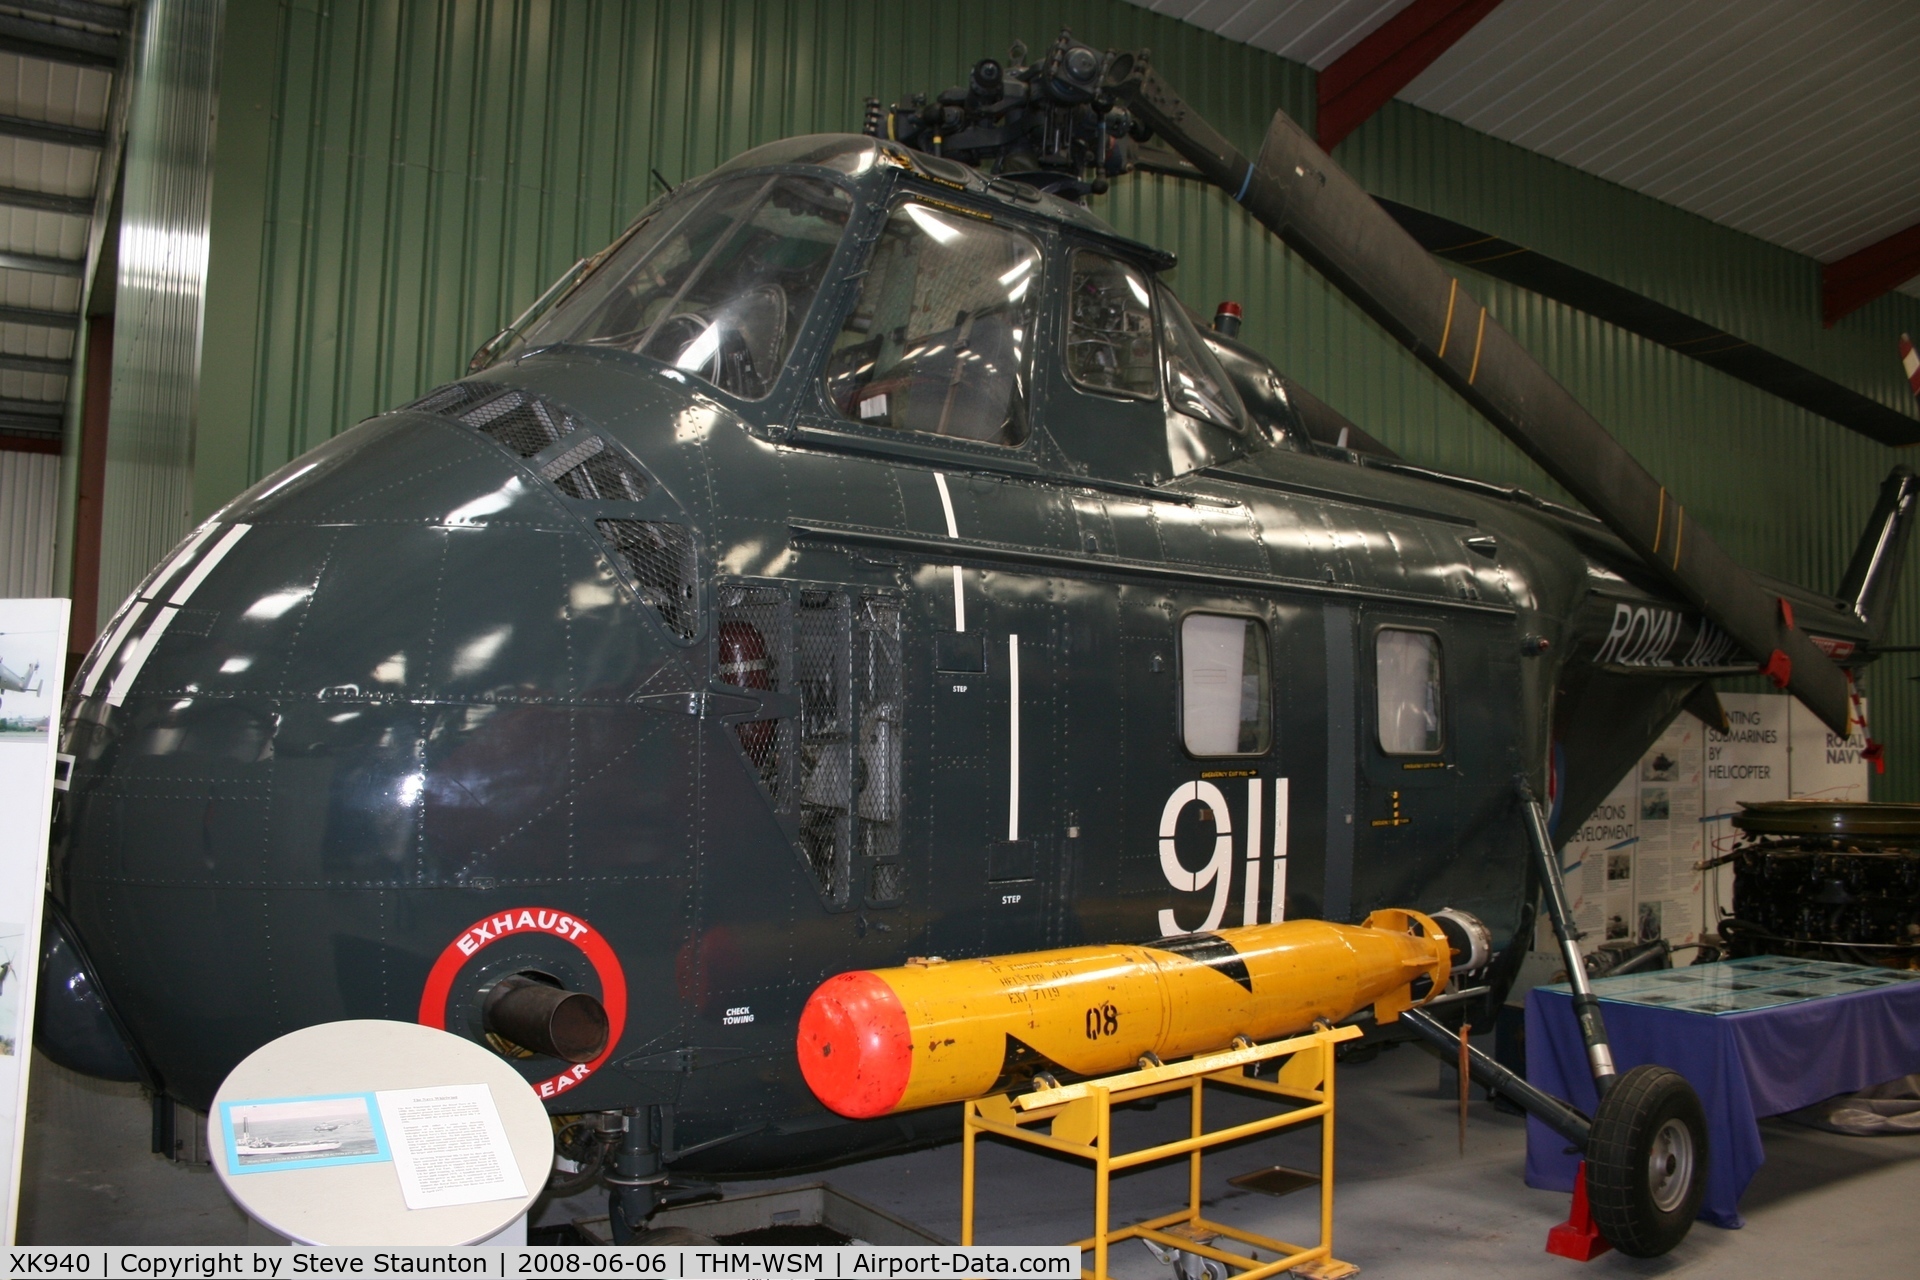 XK940, 1957 Westland Whirlwind HAS.7 C/N WA167, Taken at the Helicopter Museum (http://www.helicoptermuseum.co.uk/)